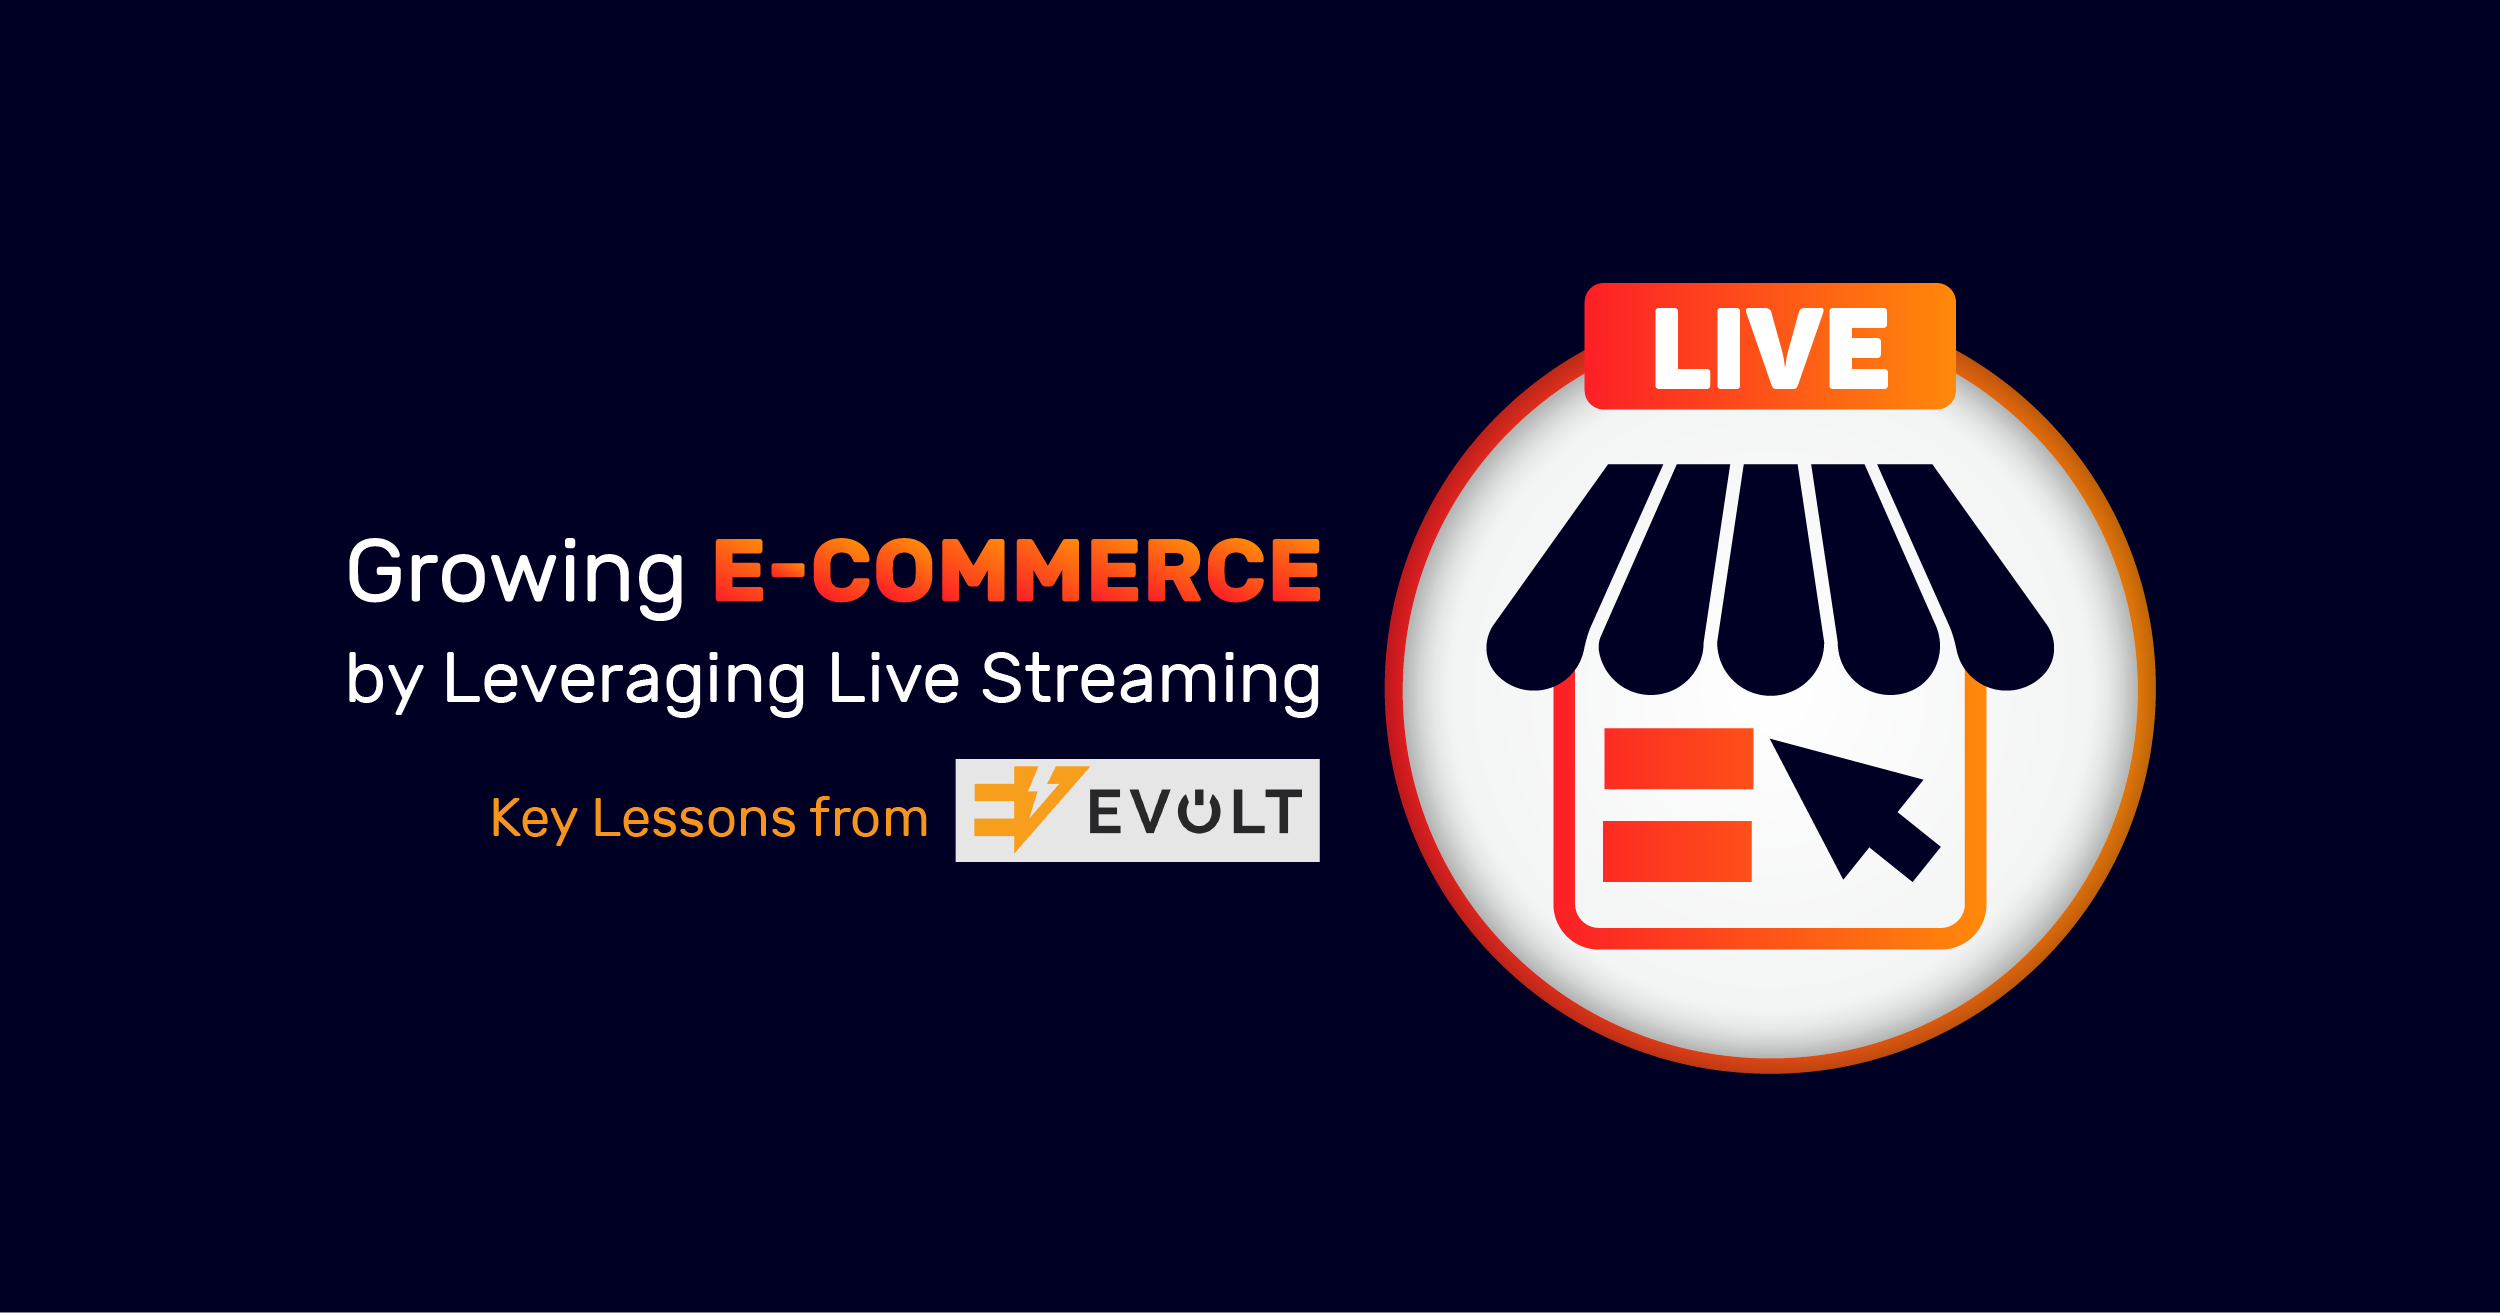 Growing E-Commerce by Leveraging Live Streaming